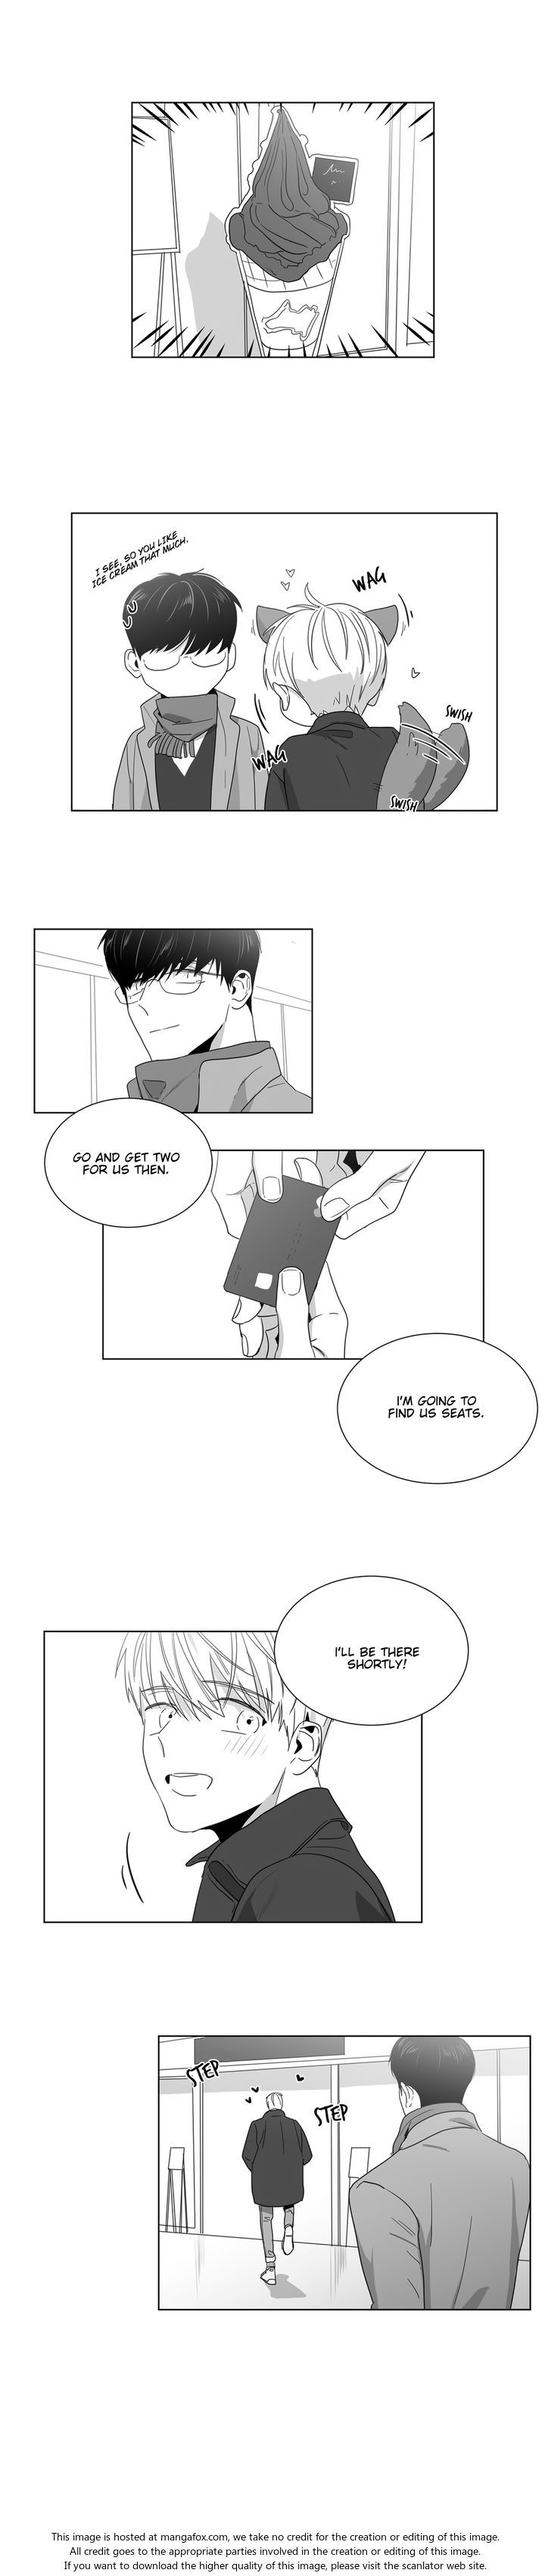 Lover Boy (Lezhin) Chapter 022 page 17